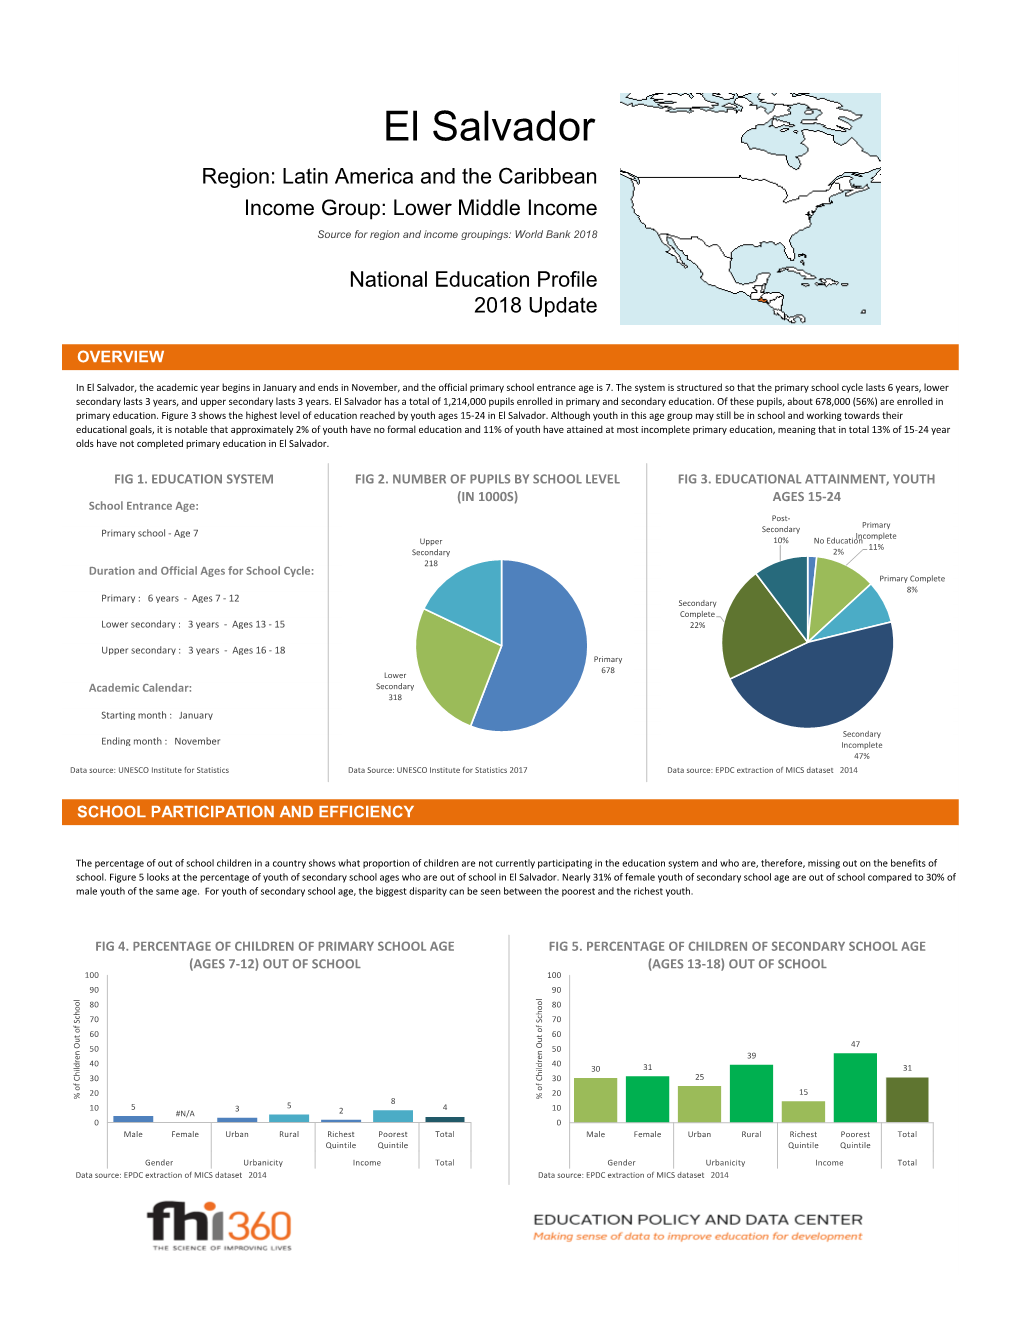 El Salvador Region: Latin America and the Caribbean Income Group: Lower Middle Income Source for Region and Income Groupings: World Bank 2018